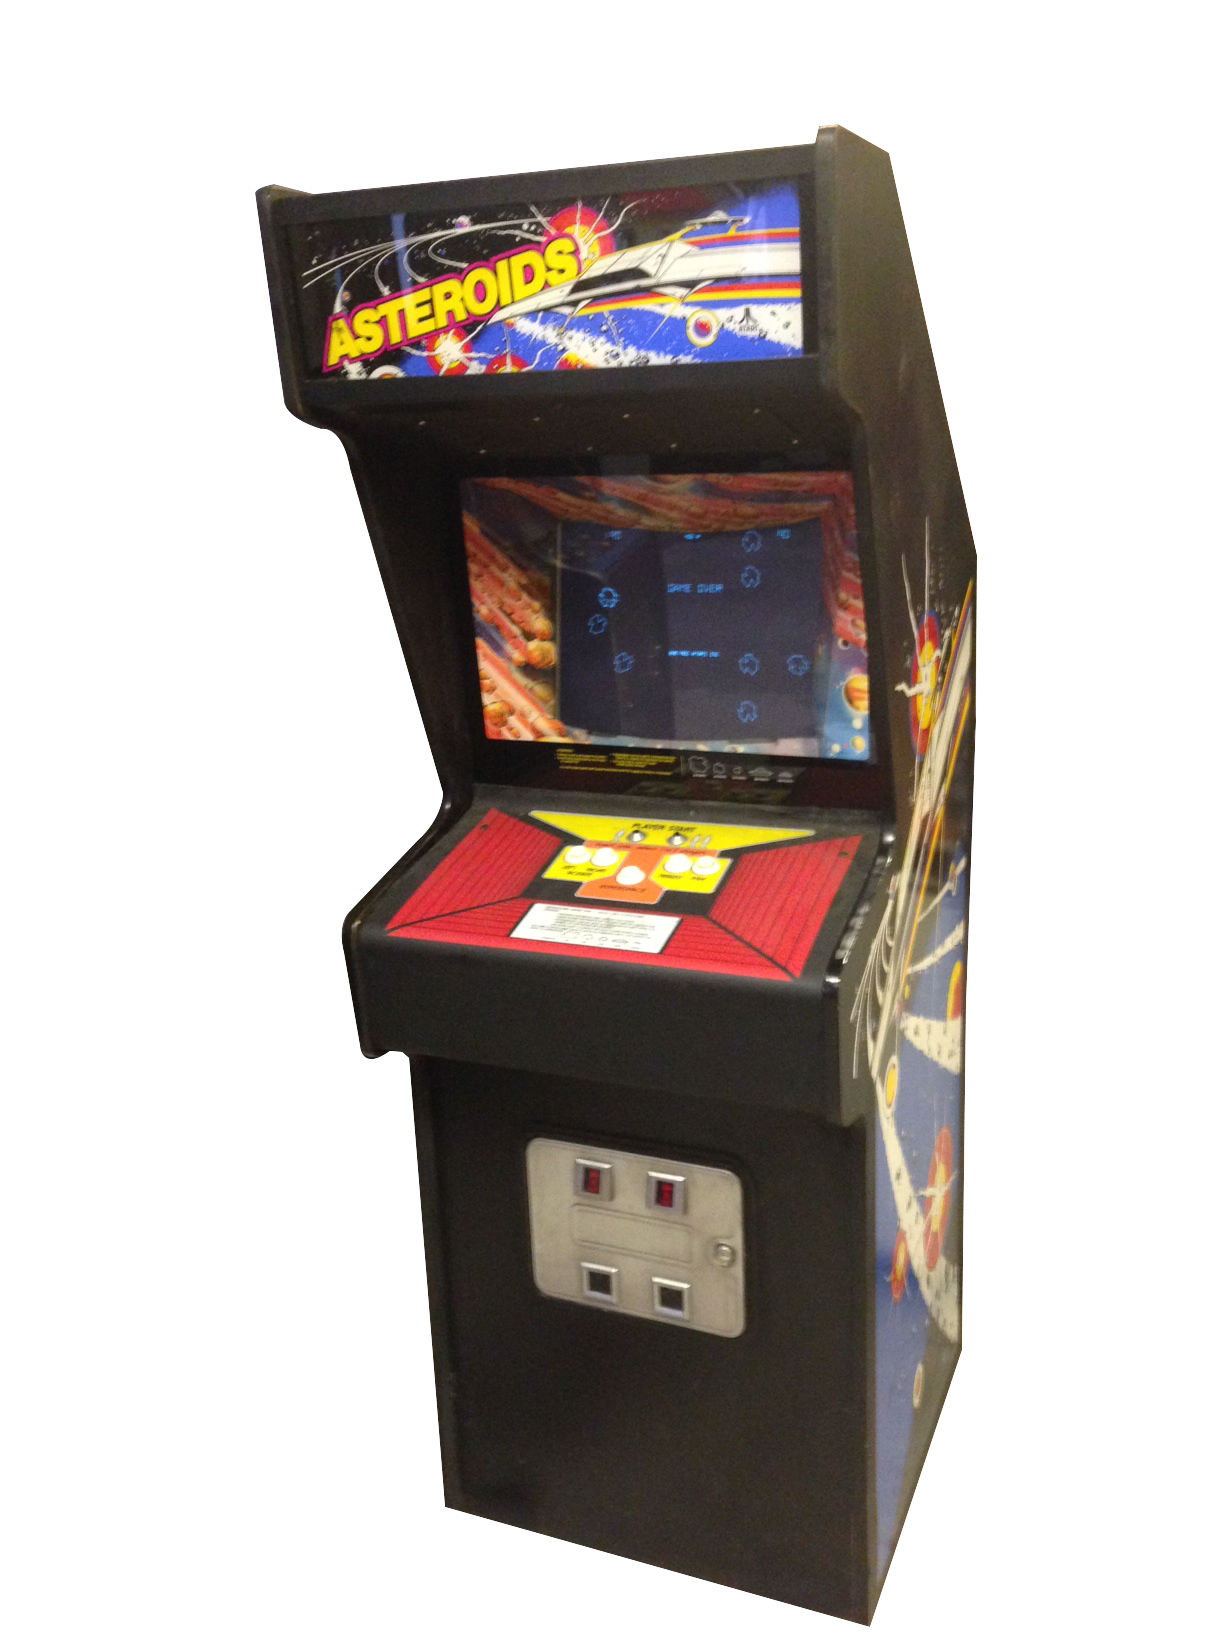 Asteroids Arcade Machine For Hire | Hire Arcade Games | AMH UK